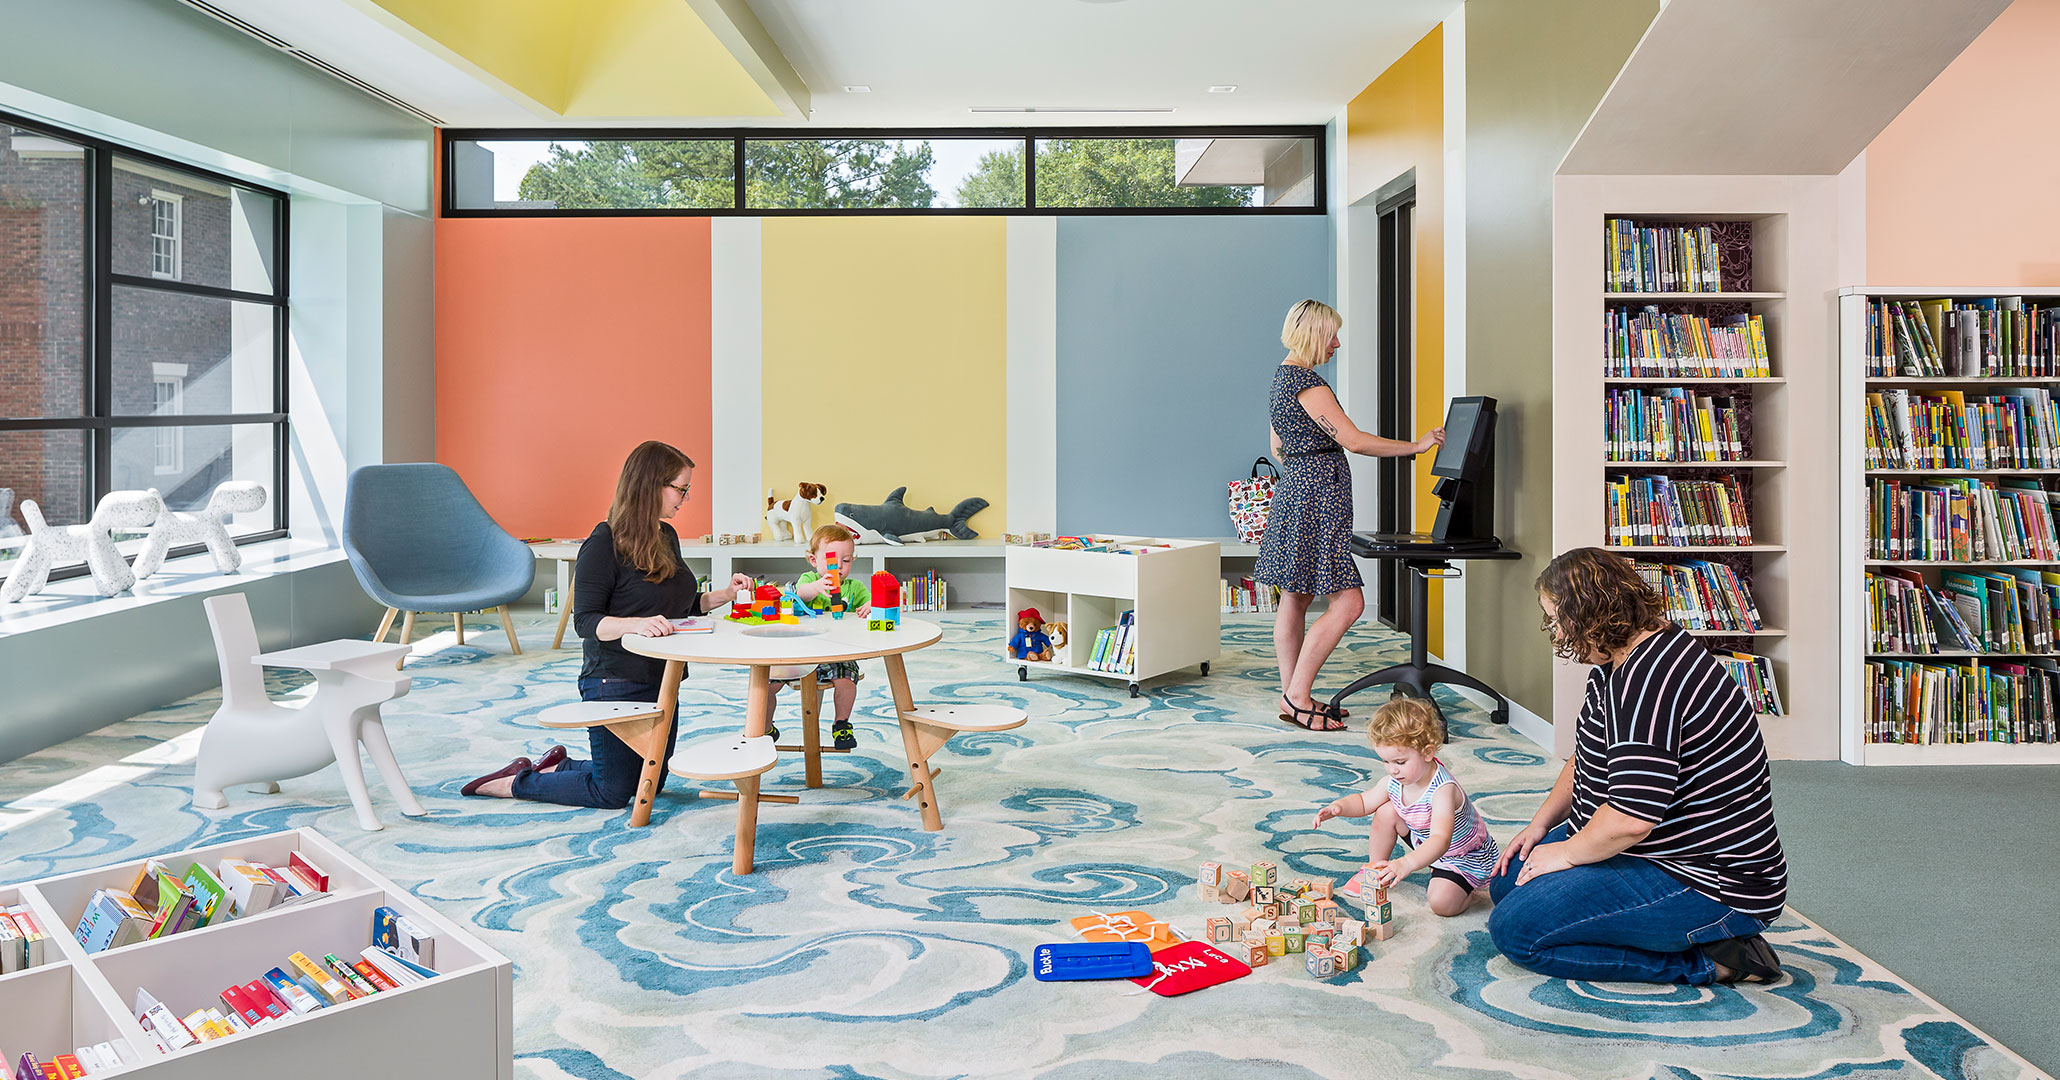 Boudreaux designed exterior spaces for children and adults to use for educational purposes.